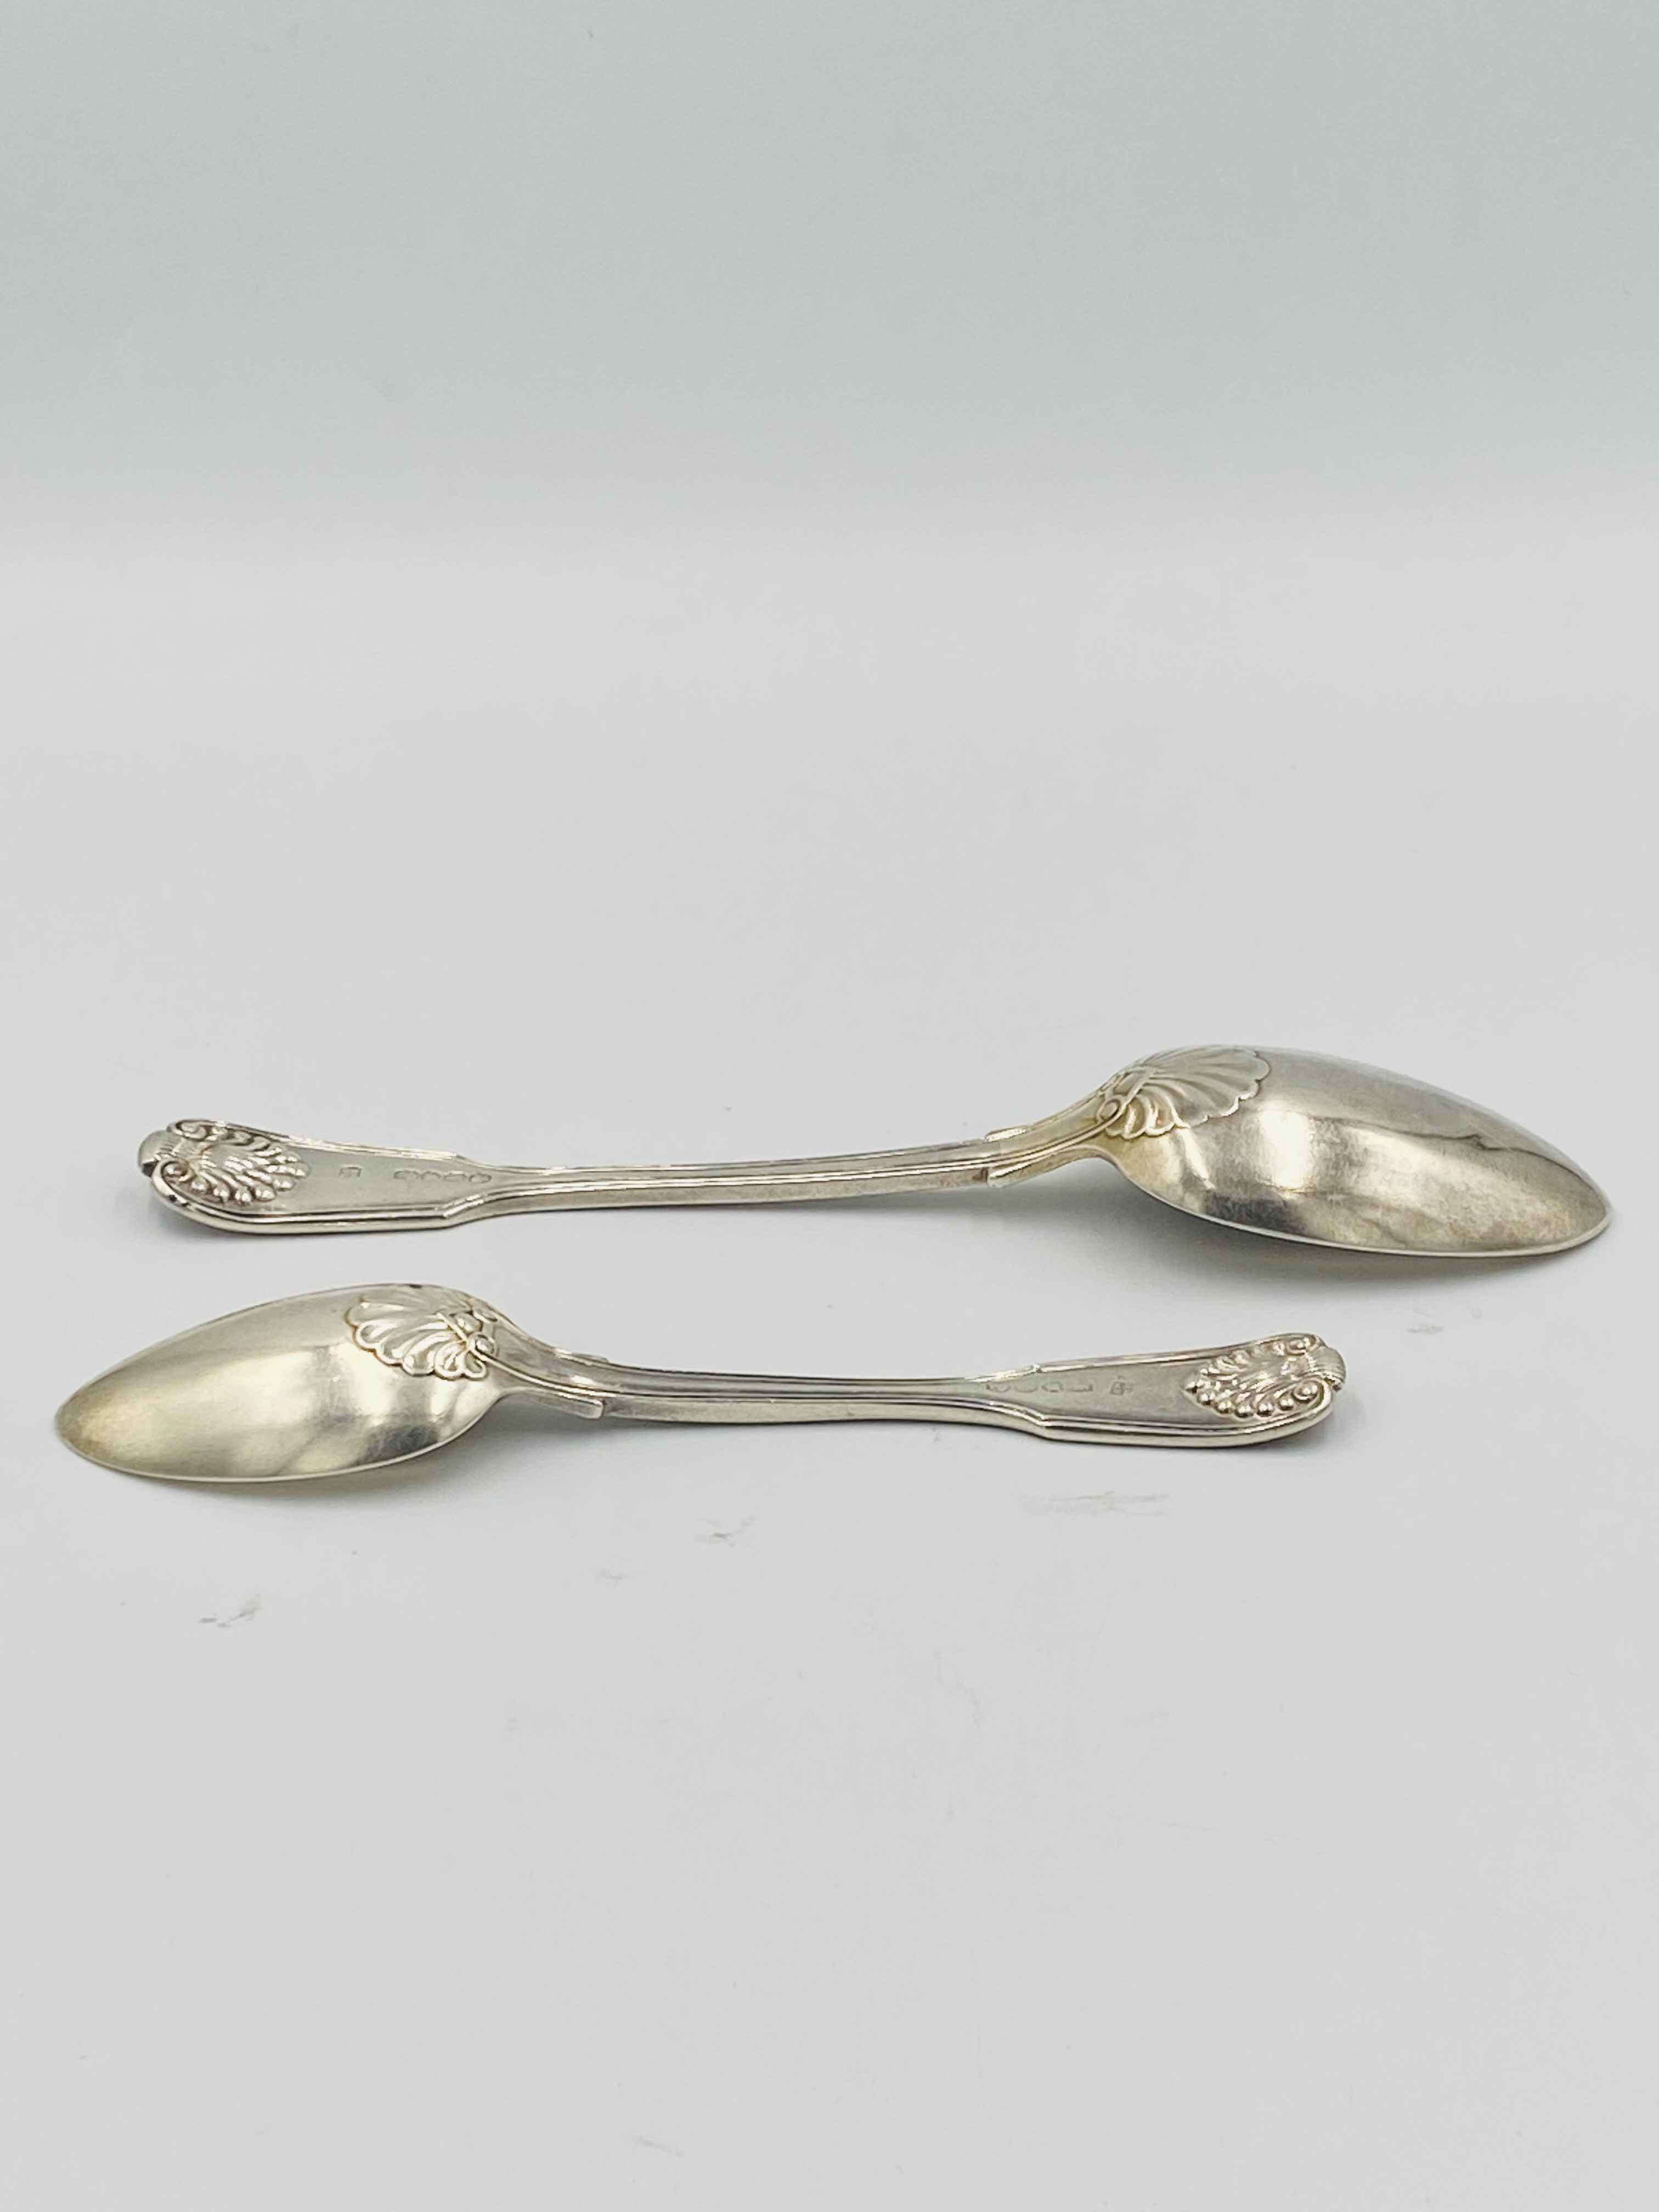 Four large and twelve smaller silver spoons - Image 3 of 5